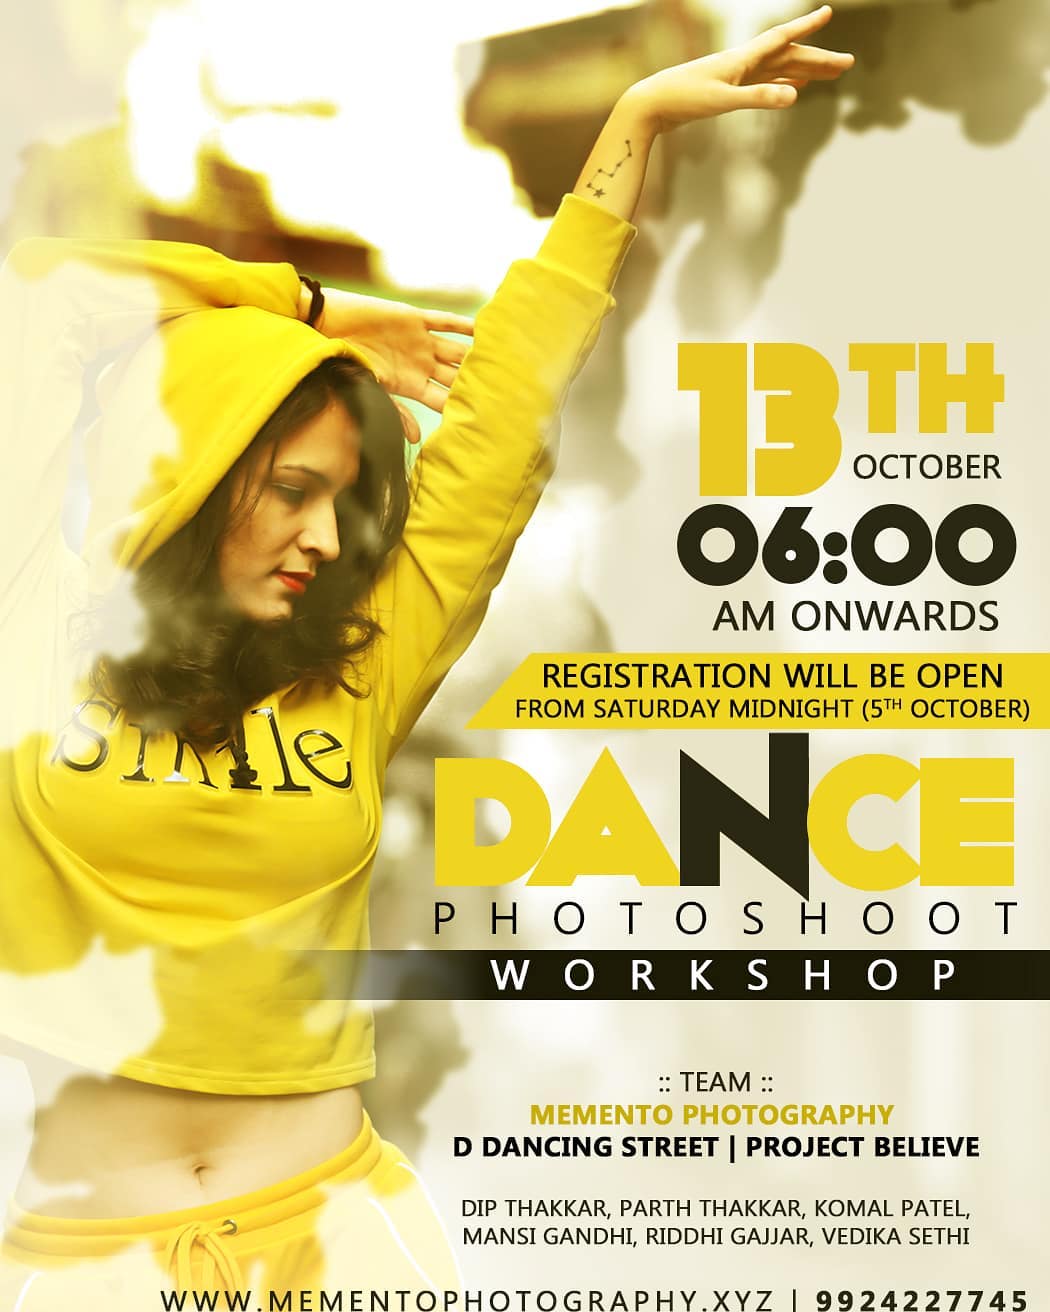 Hello Artists,

Dance Photography Workshop.

Workshop date 13th oct, 
Time 6.00am - 11.00am.

Registration will be open from Saturday Midnight(5th Oct).
( via Google form link)

Charges will be mentioned in the upcoming Registration form and  poster for particular date.

100% Prior to workshop meetup.

Thank you
Team : Mememto Photography | D Dancing Street | Project Believe

Contact 9924227745 for any queries.

#dancephotographer #dancephotographyworkshop
#ahmedabad #amdavadi #amdavad
#dancephotography #dancers #photographer #dancephoto #workshop #9924227745 #dipmementophotography #ddancingstreet #projectbelieve #streetshoot  #streetconceptshoot #conceptshoot #conceptphotoshoot #ahmedabad #exploreahmedabad
#dslrofficial  #dance #photooftheday  #dancerslife  #bestoftheday #danceshoot 
#indiaportraits #indiaphotoproject #conceptworkshop #keepdancing